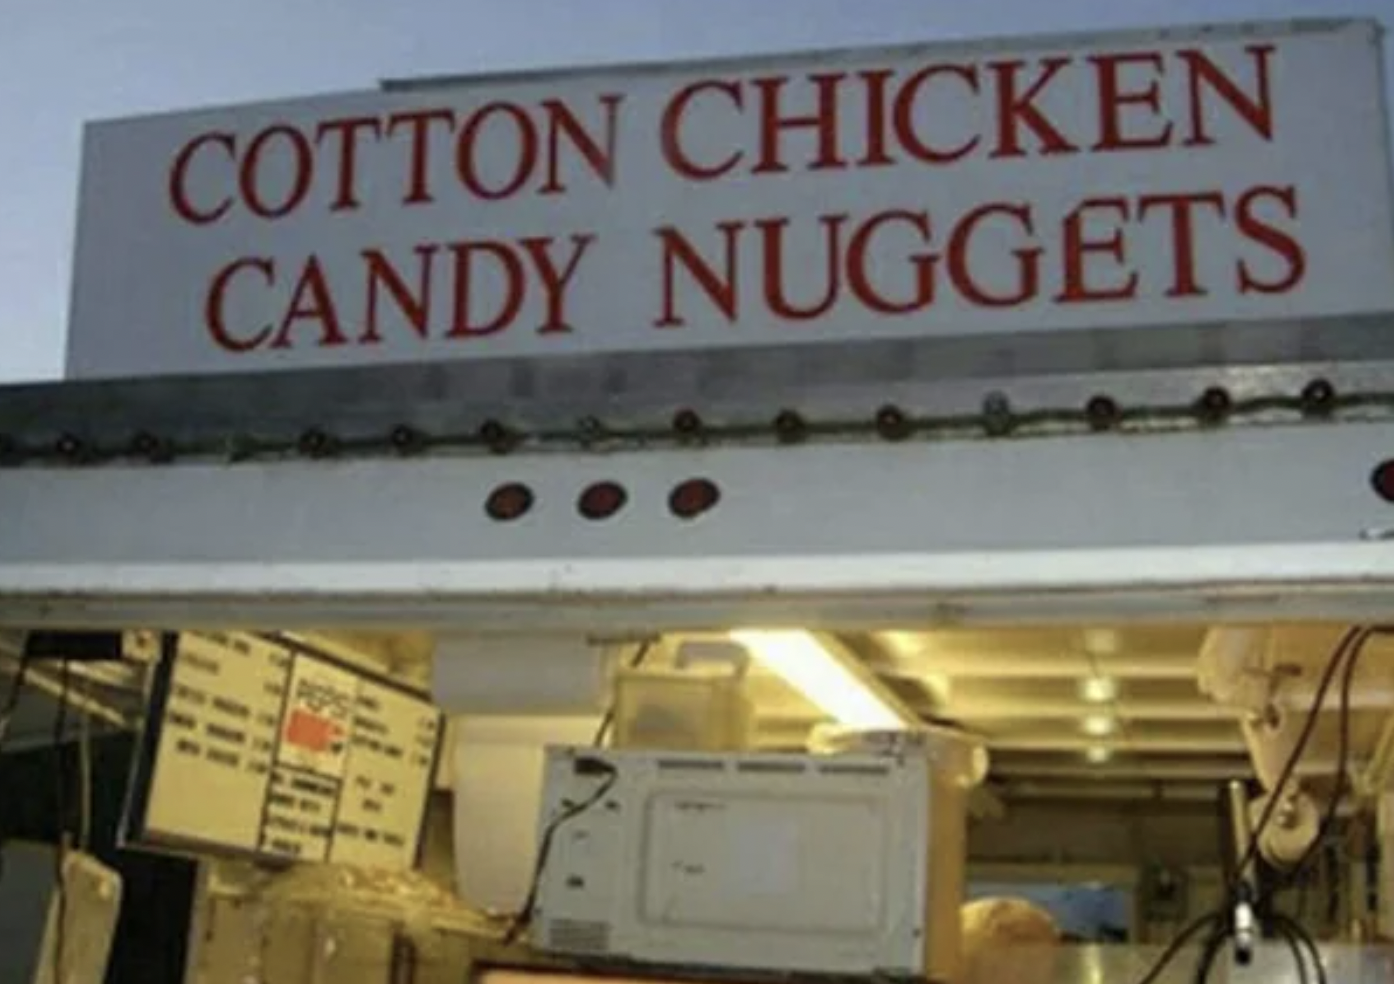 cotton candy chicken nuggets - Cotton Chicken Candy Nuggets